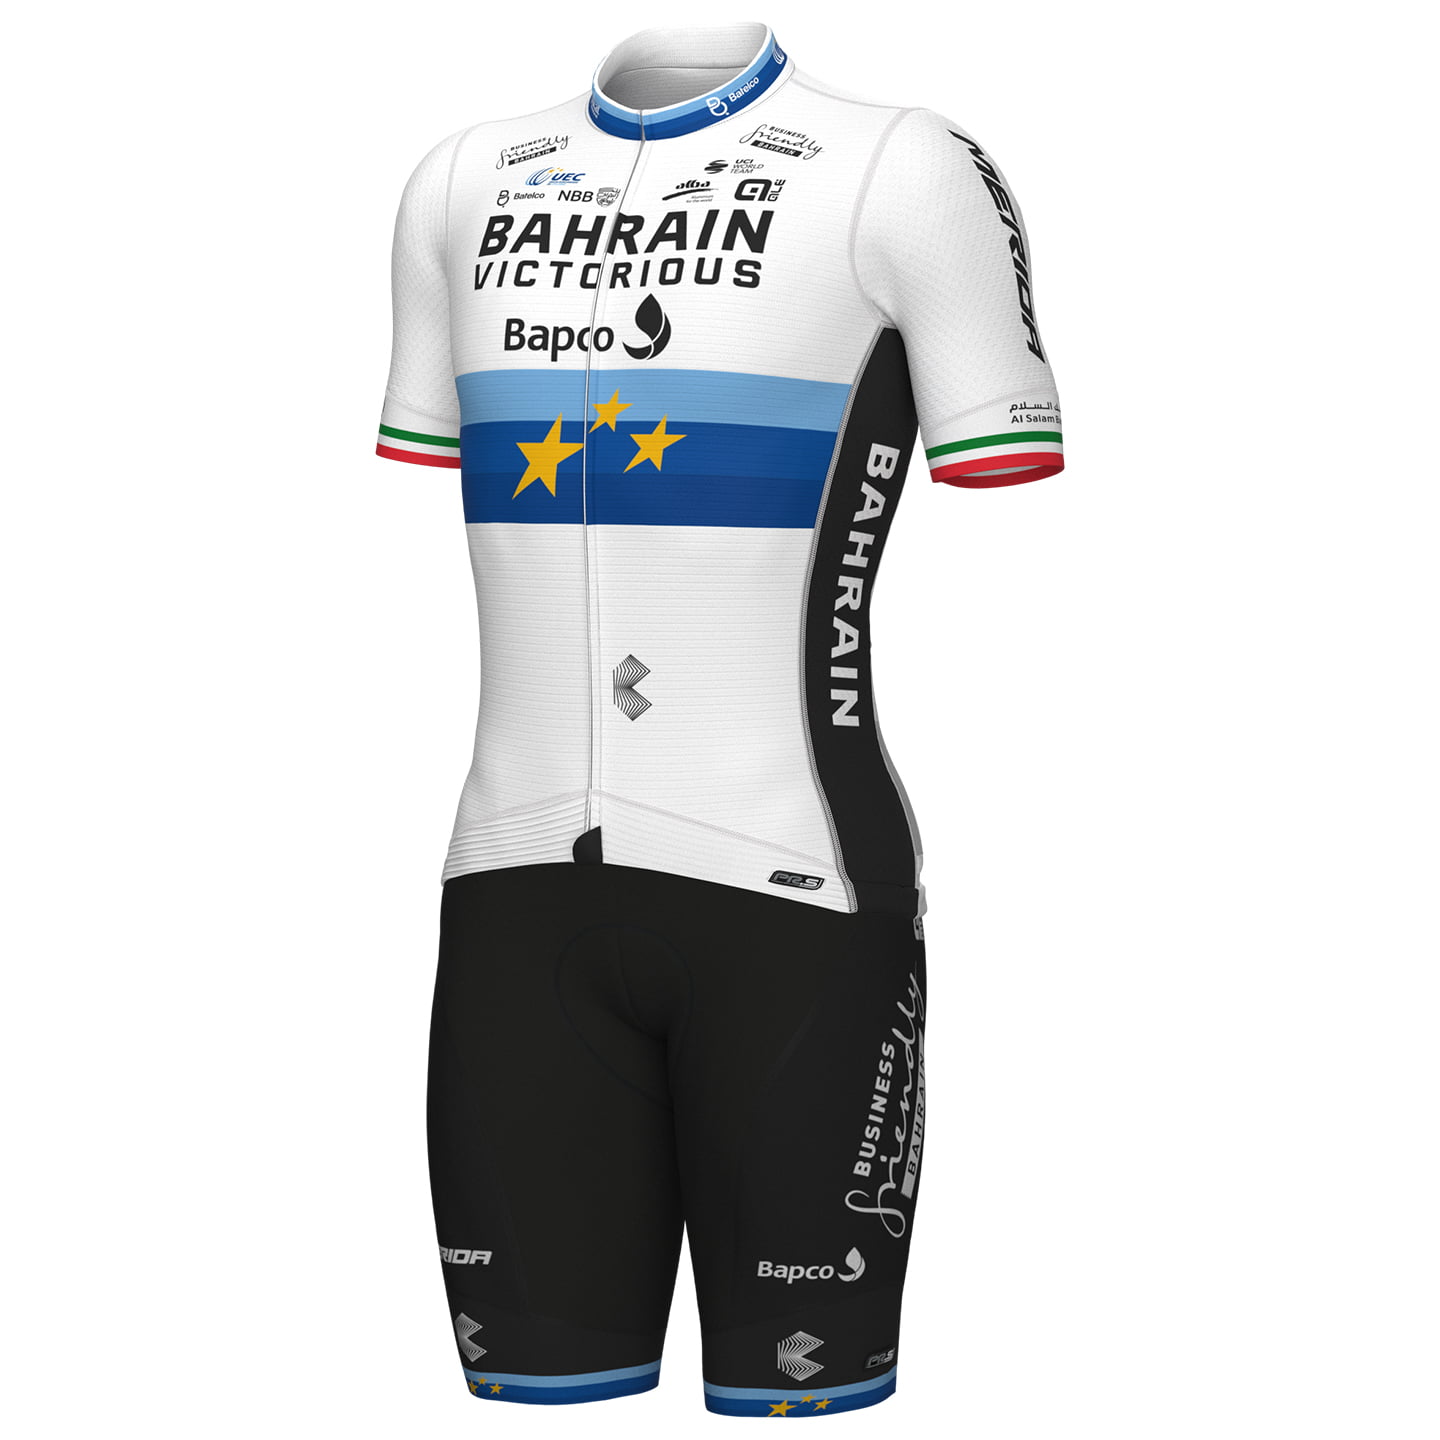 BAHRAIN - VICTORIOUS European Champion 2022 Set (cycling jersey + cycling shorts) Set (2 pieces), for men, Cycling clothing